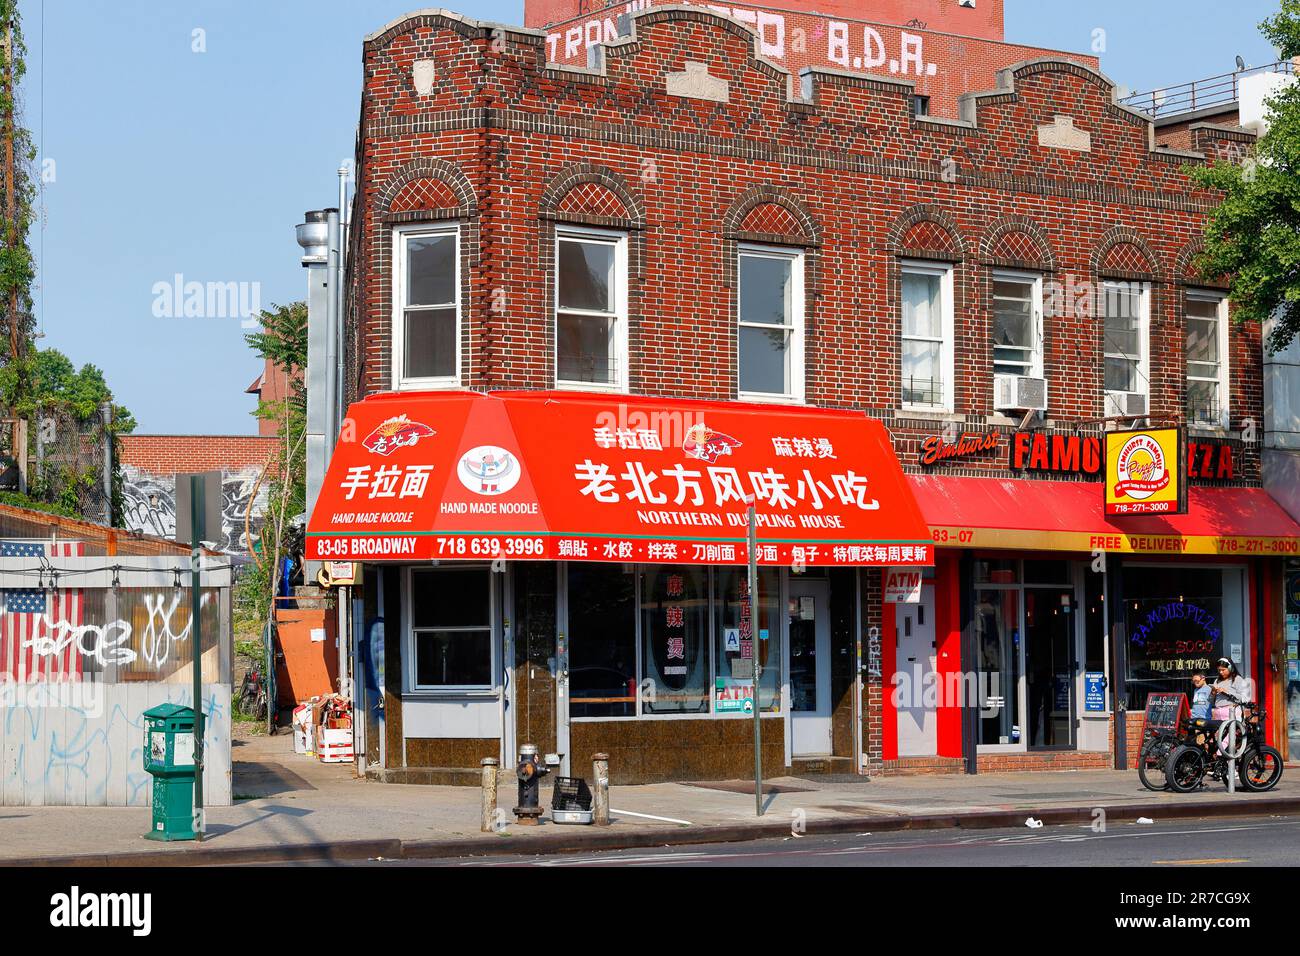 Lao Bei Fang Dumpling House 老北方風味小吃, 83-05 Broadway, Queens, New York, NYC storefront of a Chinese eatery in the Elmhurst neighborhood. Stock Photo